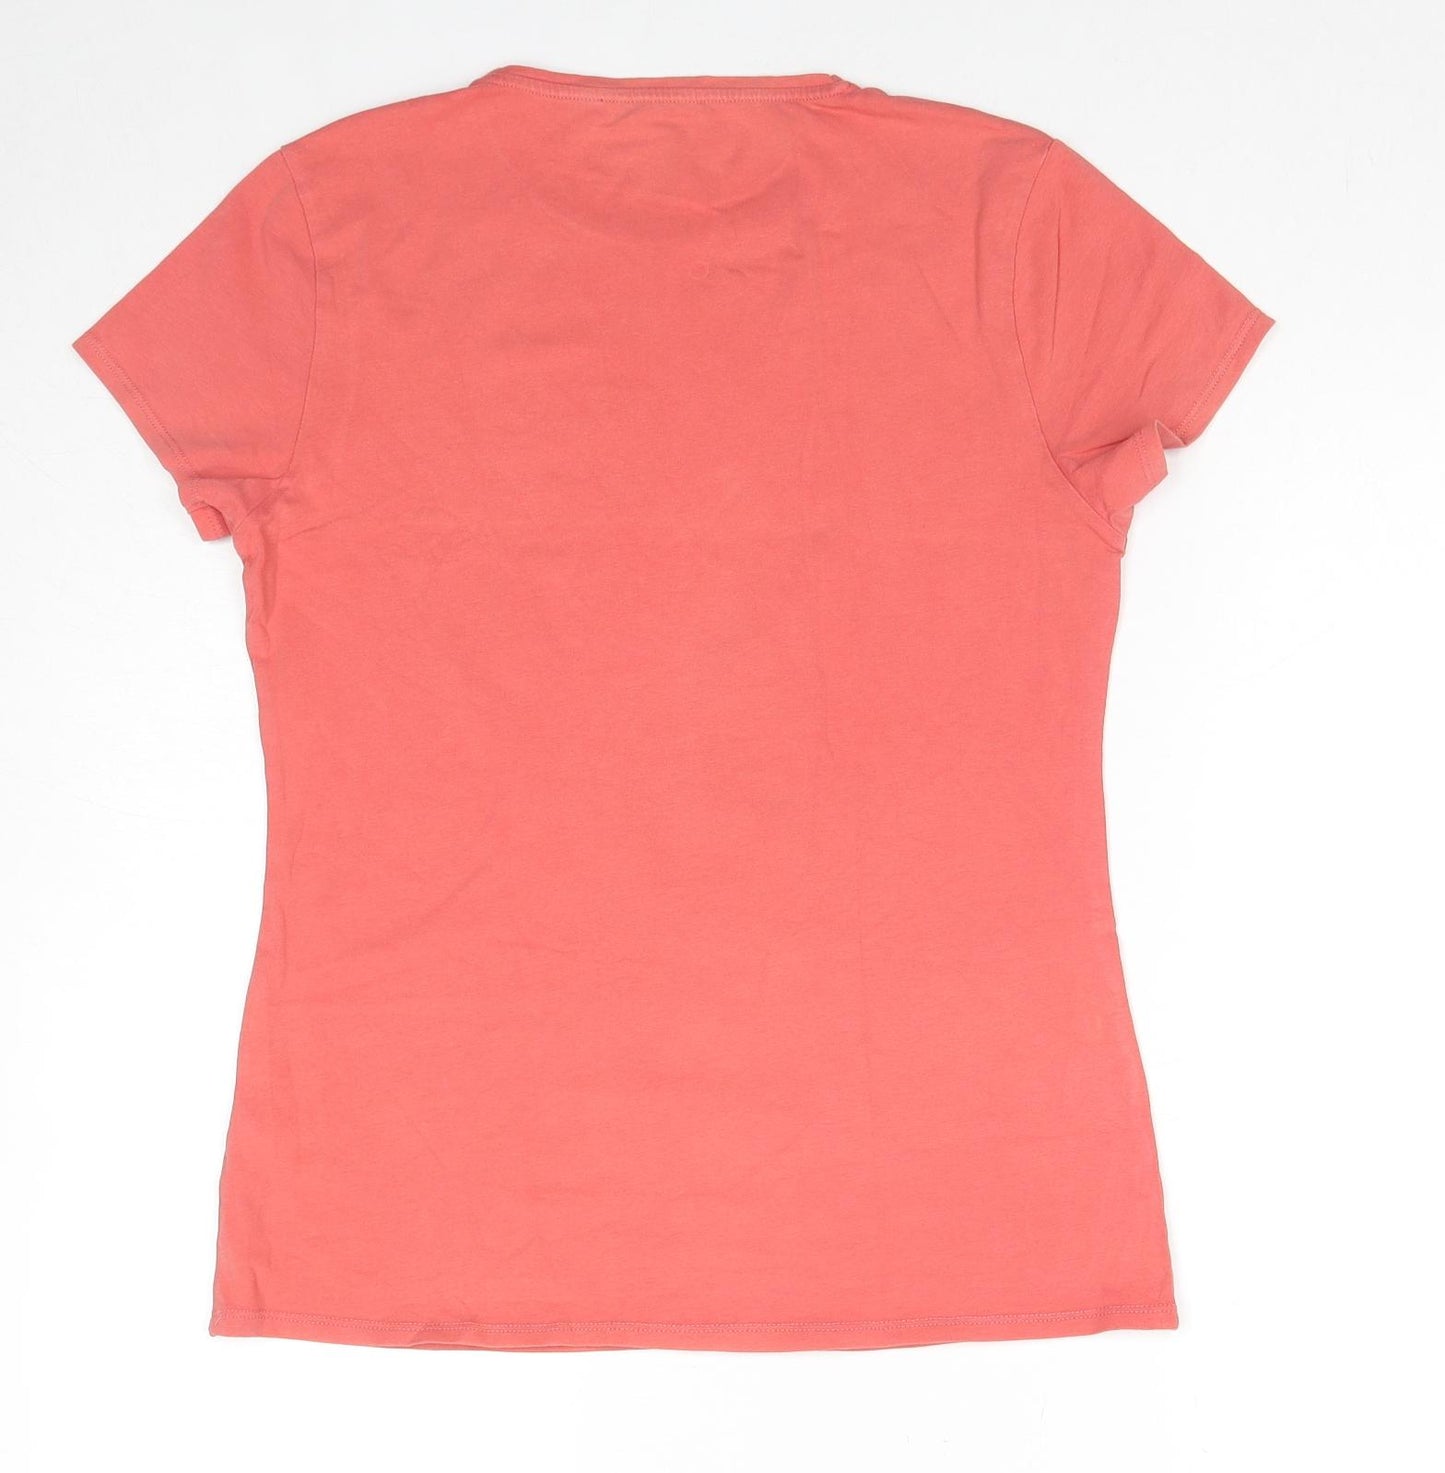 Marks and Spencer Womens Red Cotton Basic T-Shirt Size 12 Crew Neck